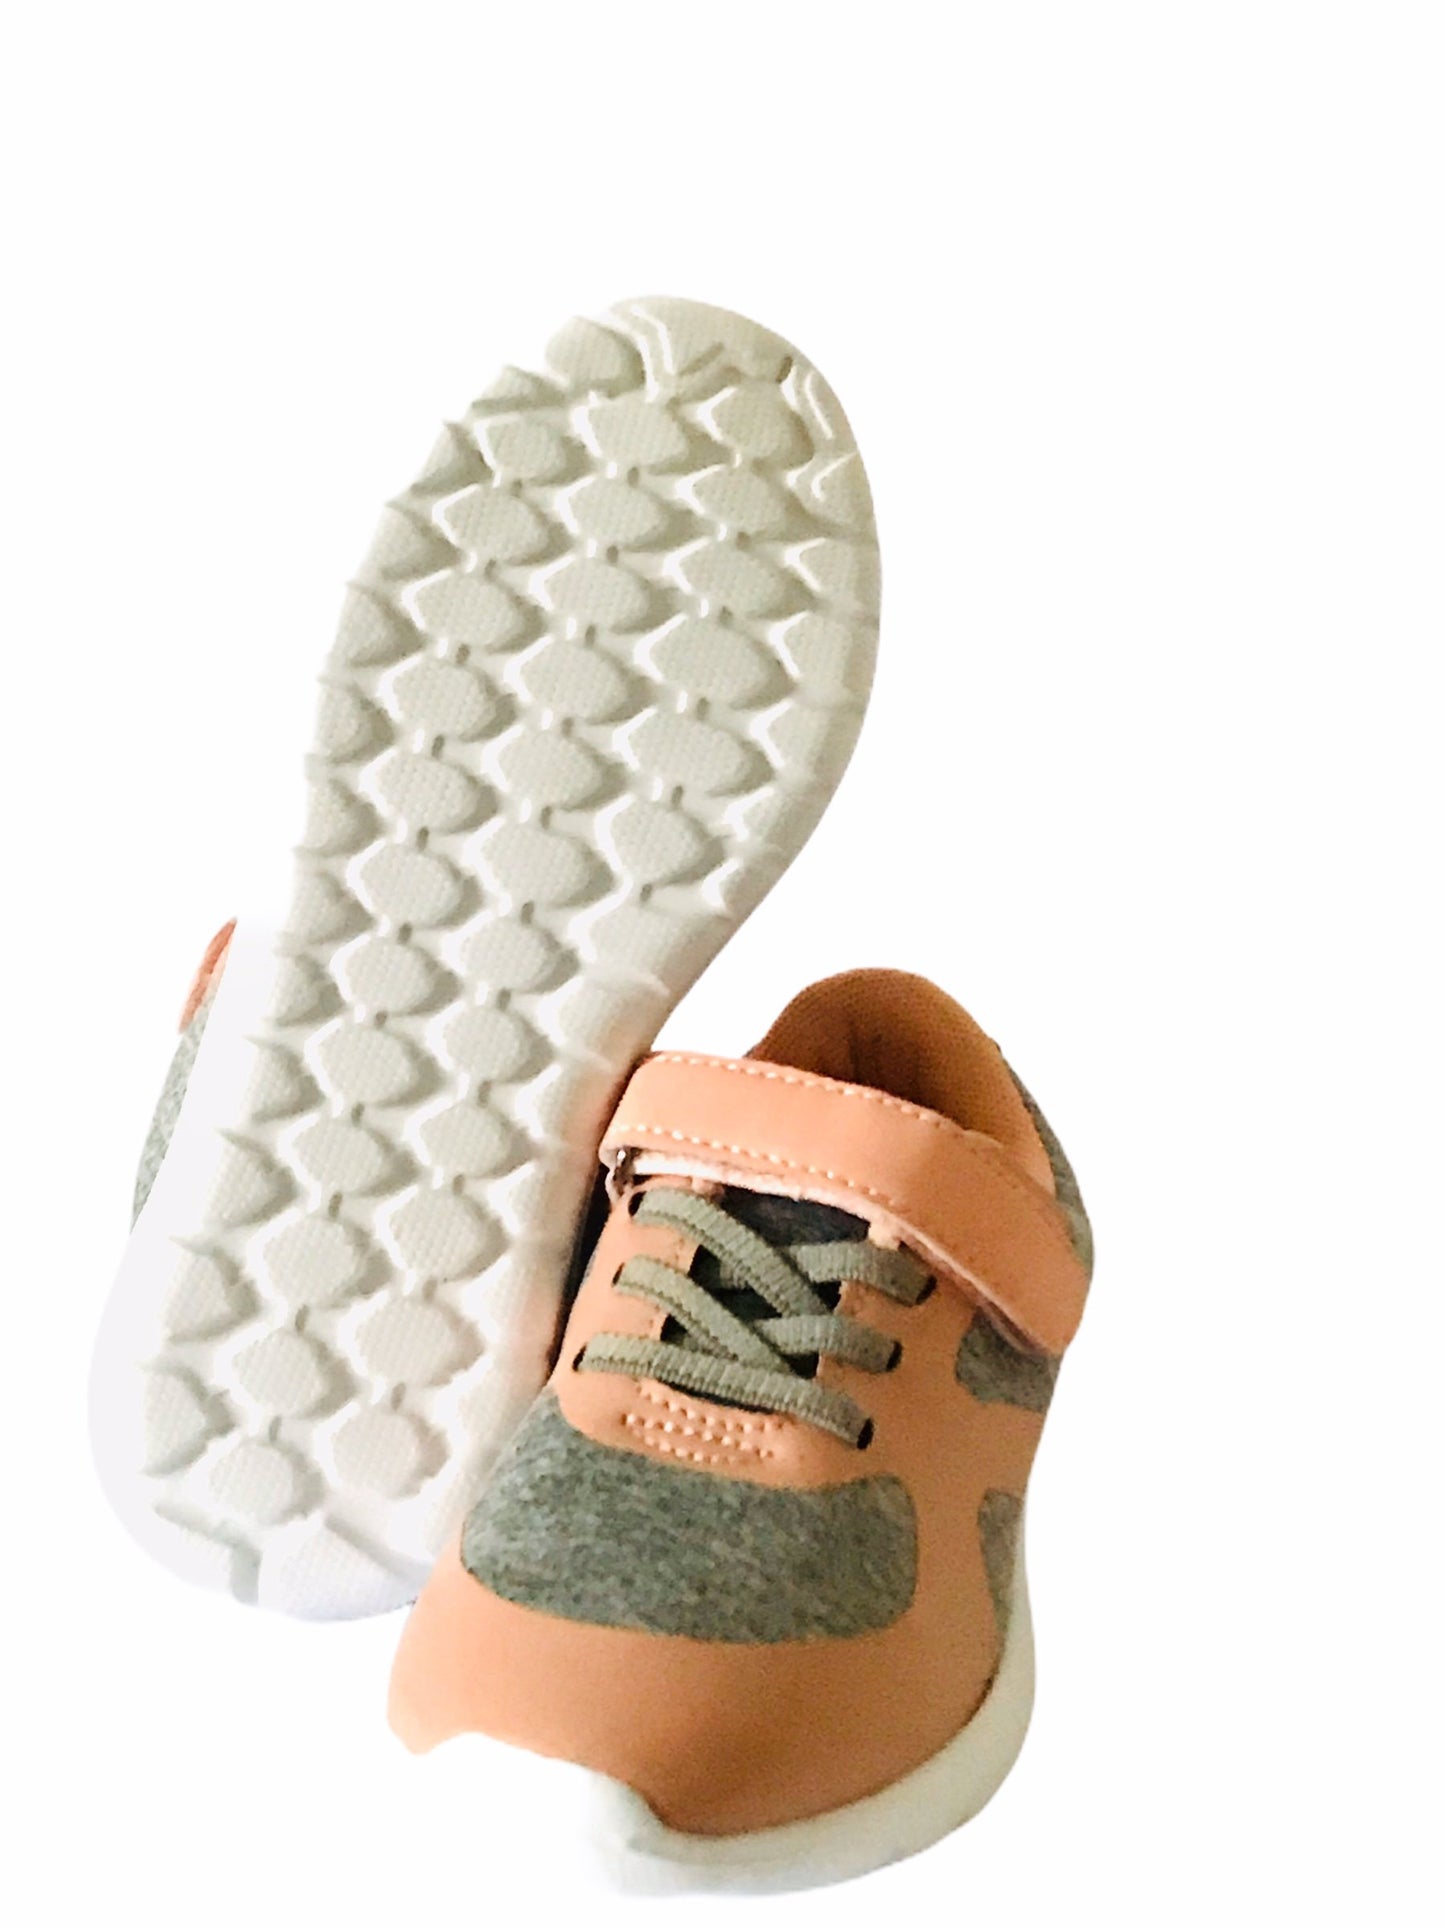 KIDS Peach & Grey Trainers - Glo Selections Kids Shoes